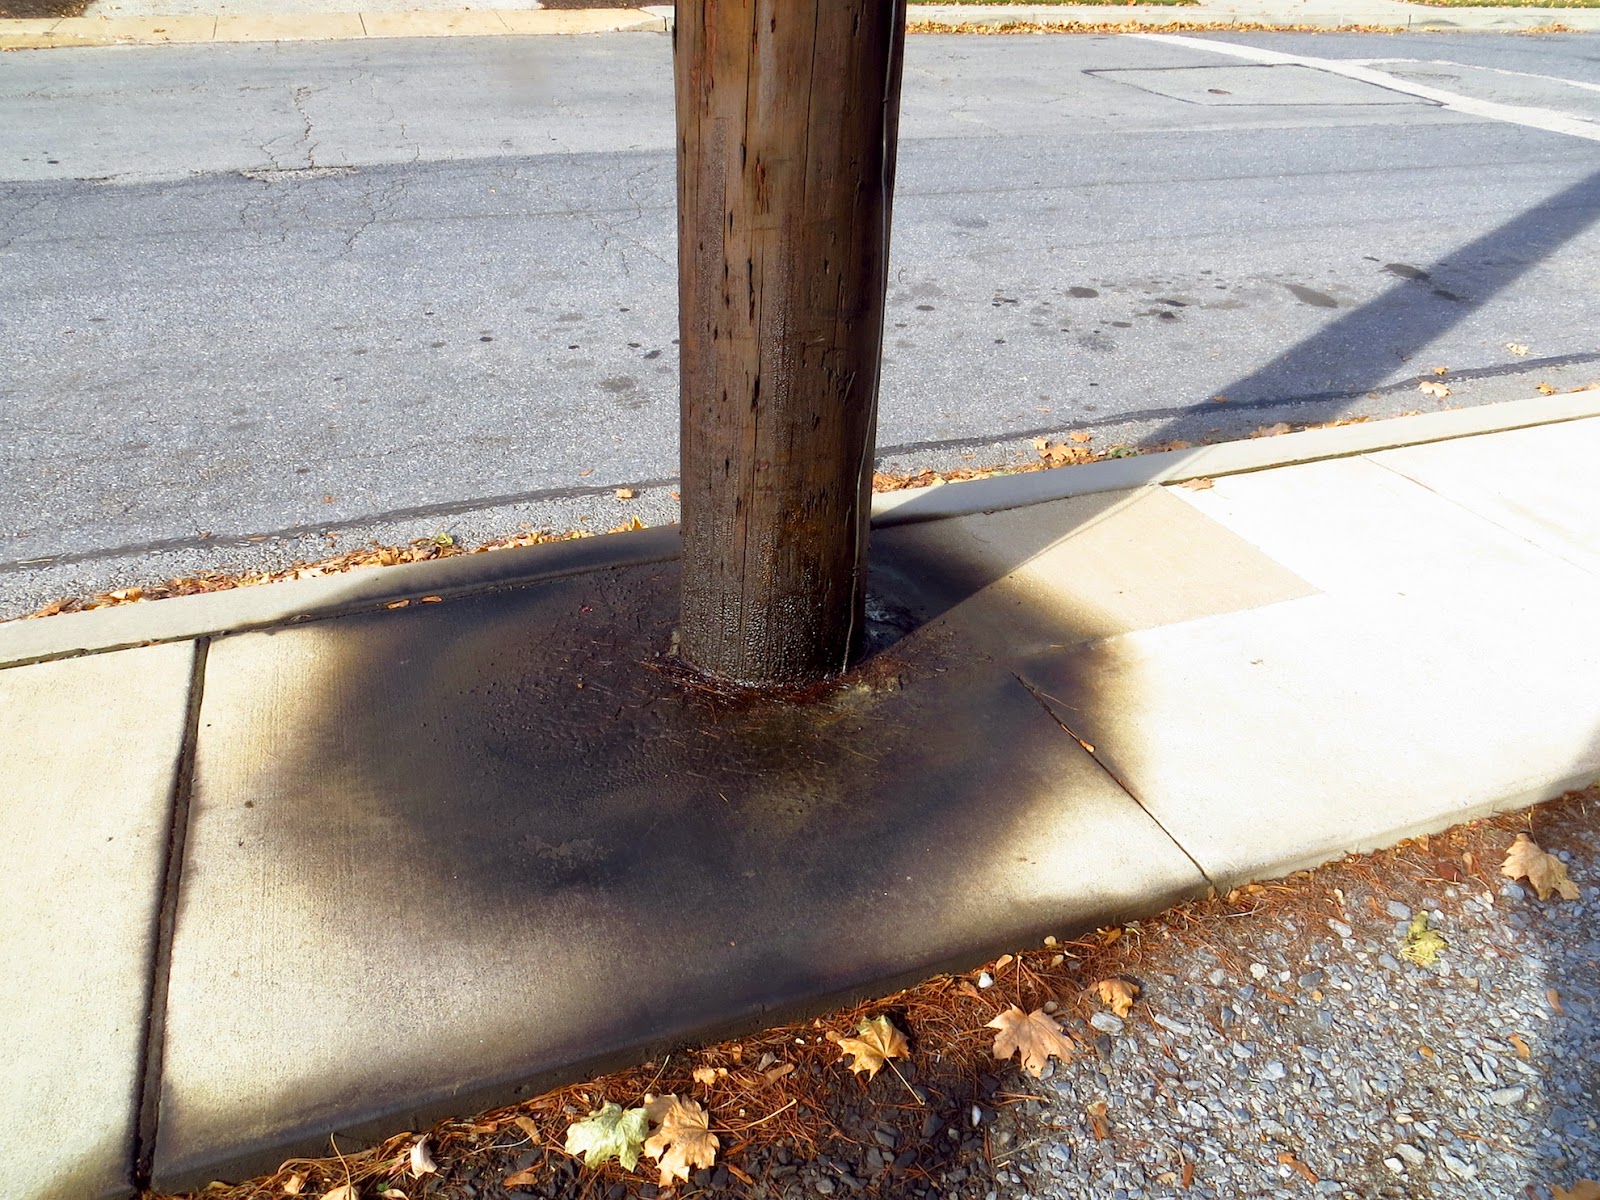 COLUMBIA SPY: What I Saw November 23, 2014 How To Remove Creosote From Telephone Pole